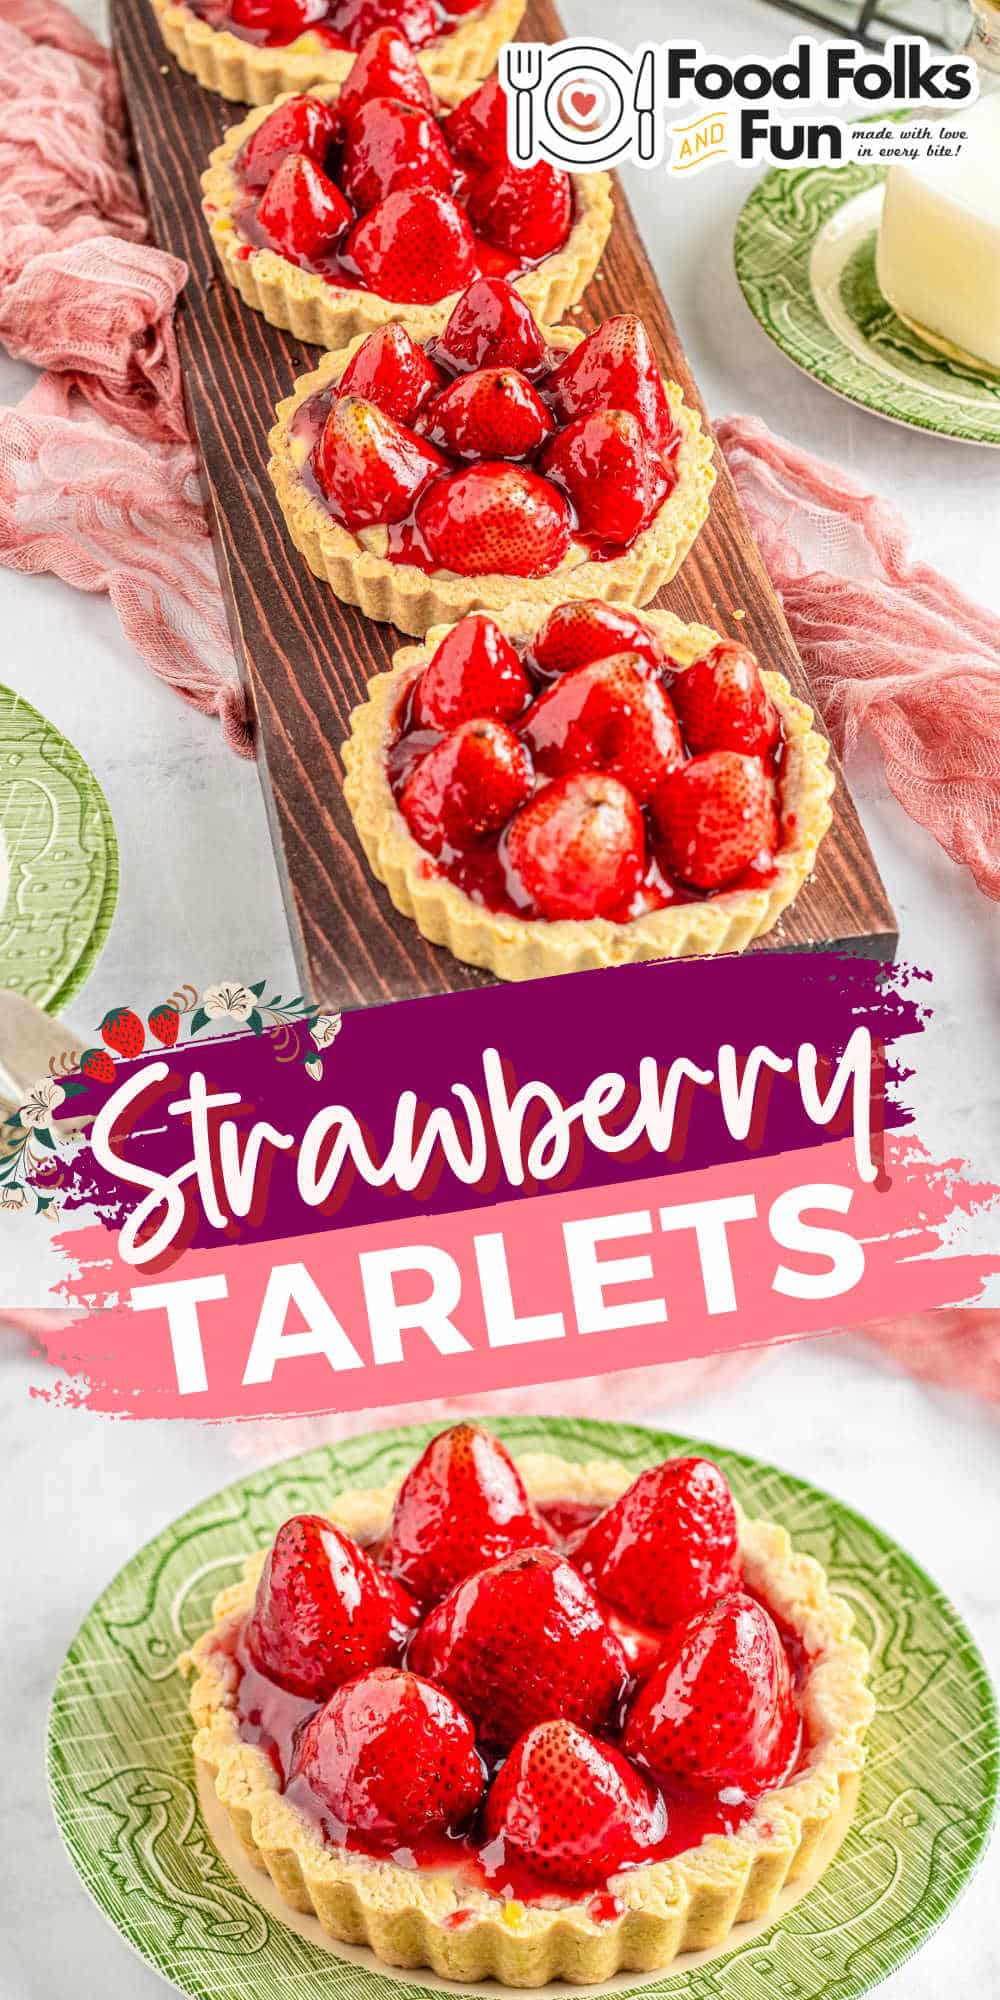 This recipe for Strawberry Tartlets is an elegant way to finish any meal. They have a crisp crust and a dreamy homemade custard filling. via @foodfolksandfun